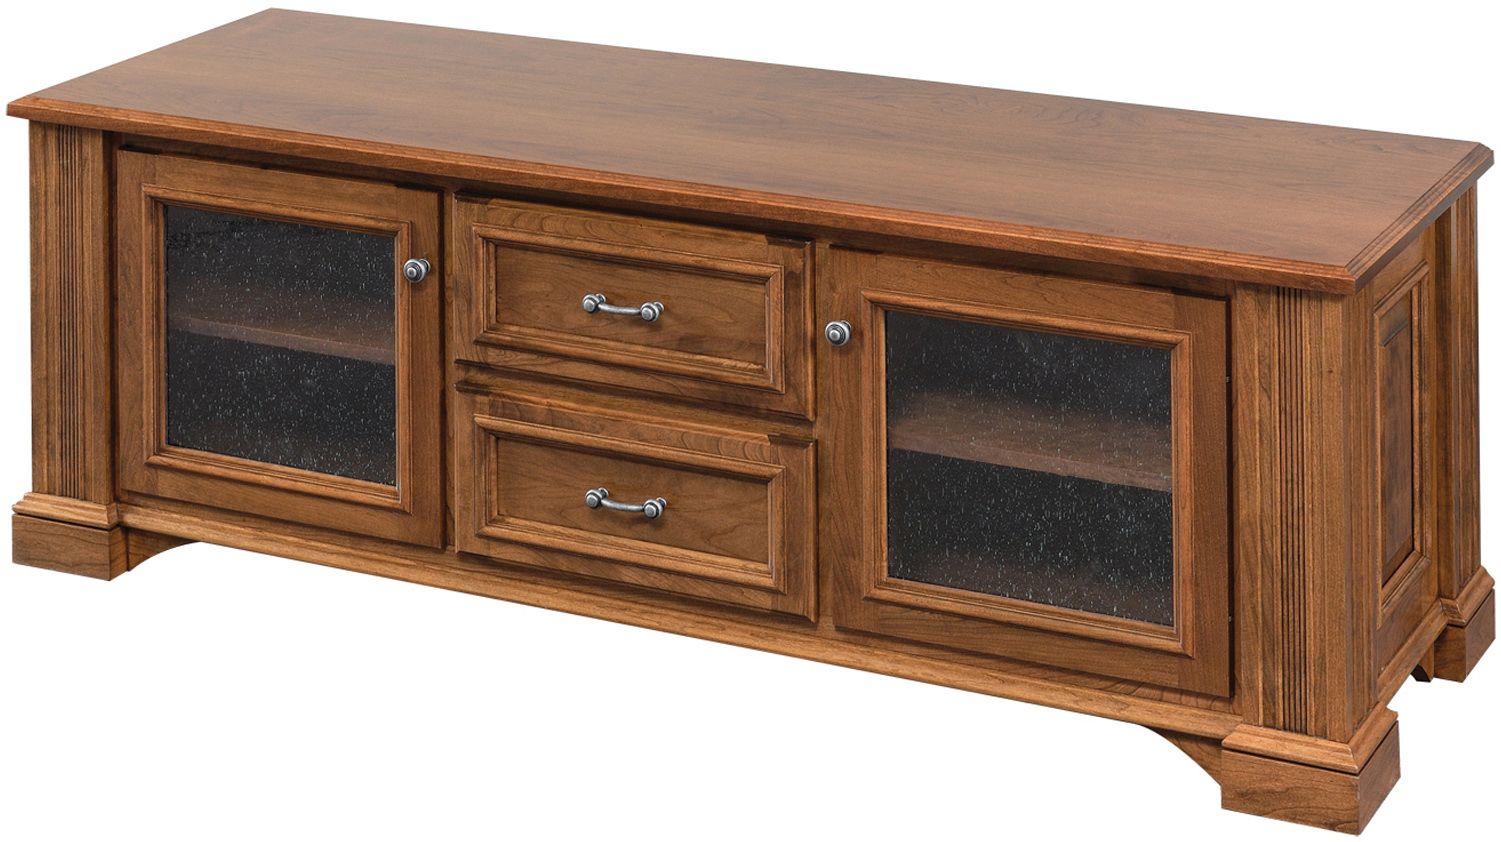 Lincoln Deluxe Plasma Tv Stand | Amish Solid Hardwood Tv Intended For Tv Stands With Back Panel (View 15 of 15)